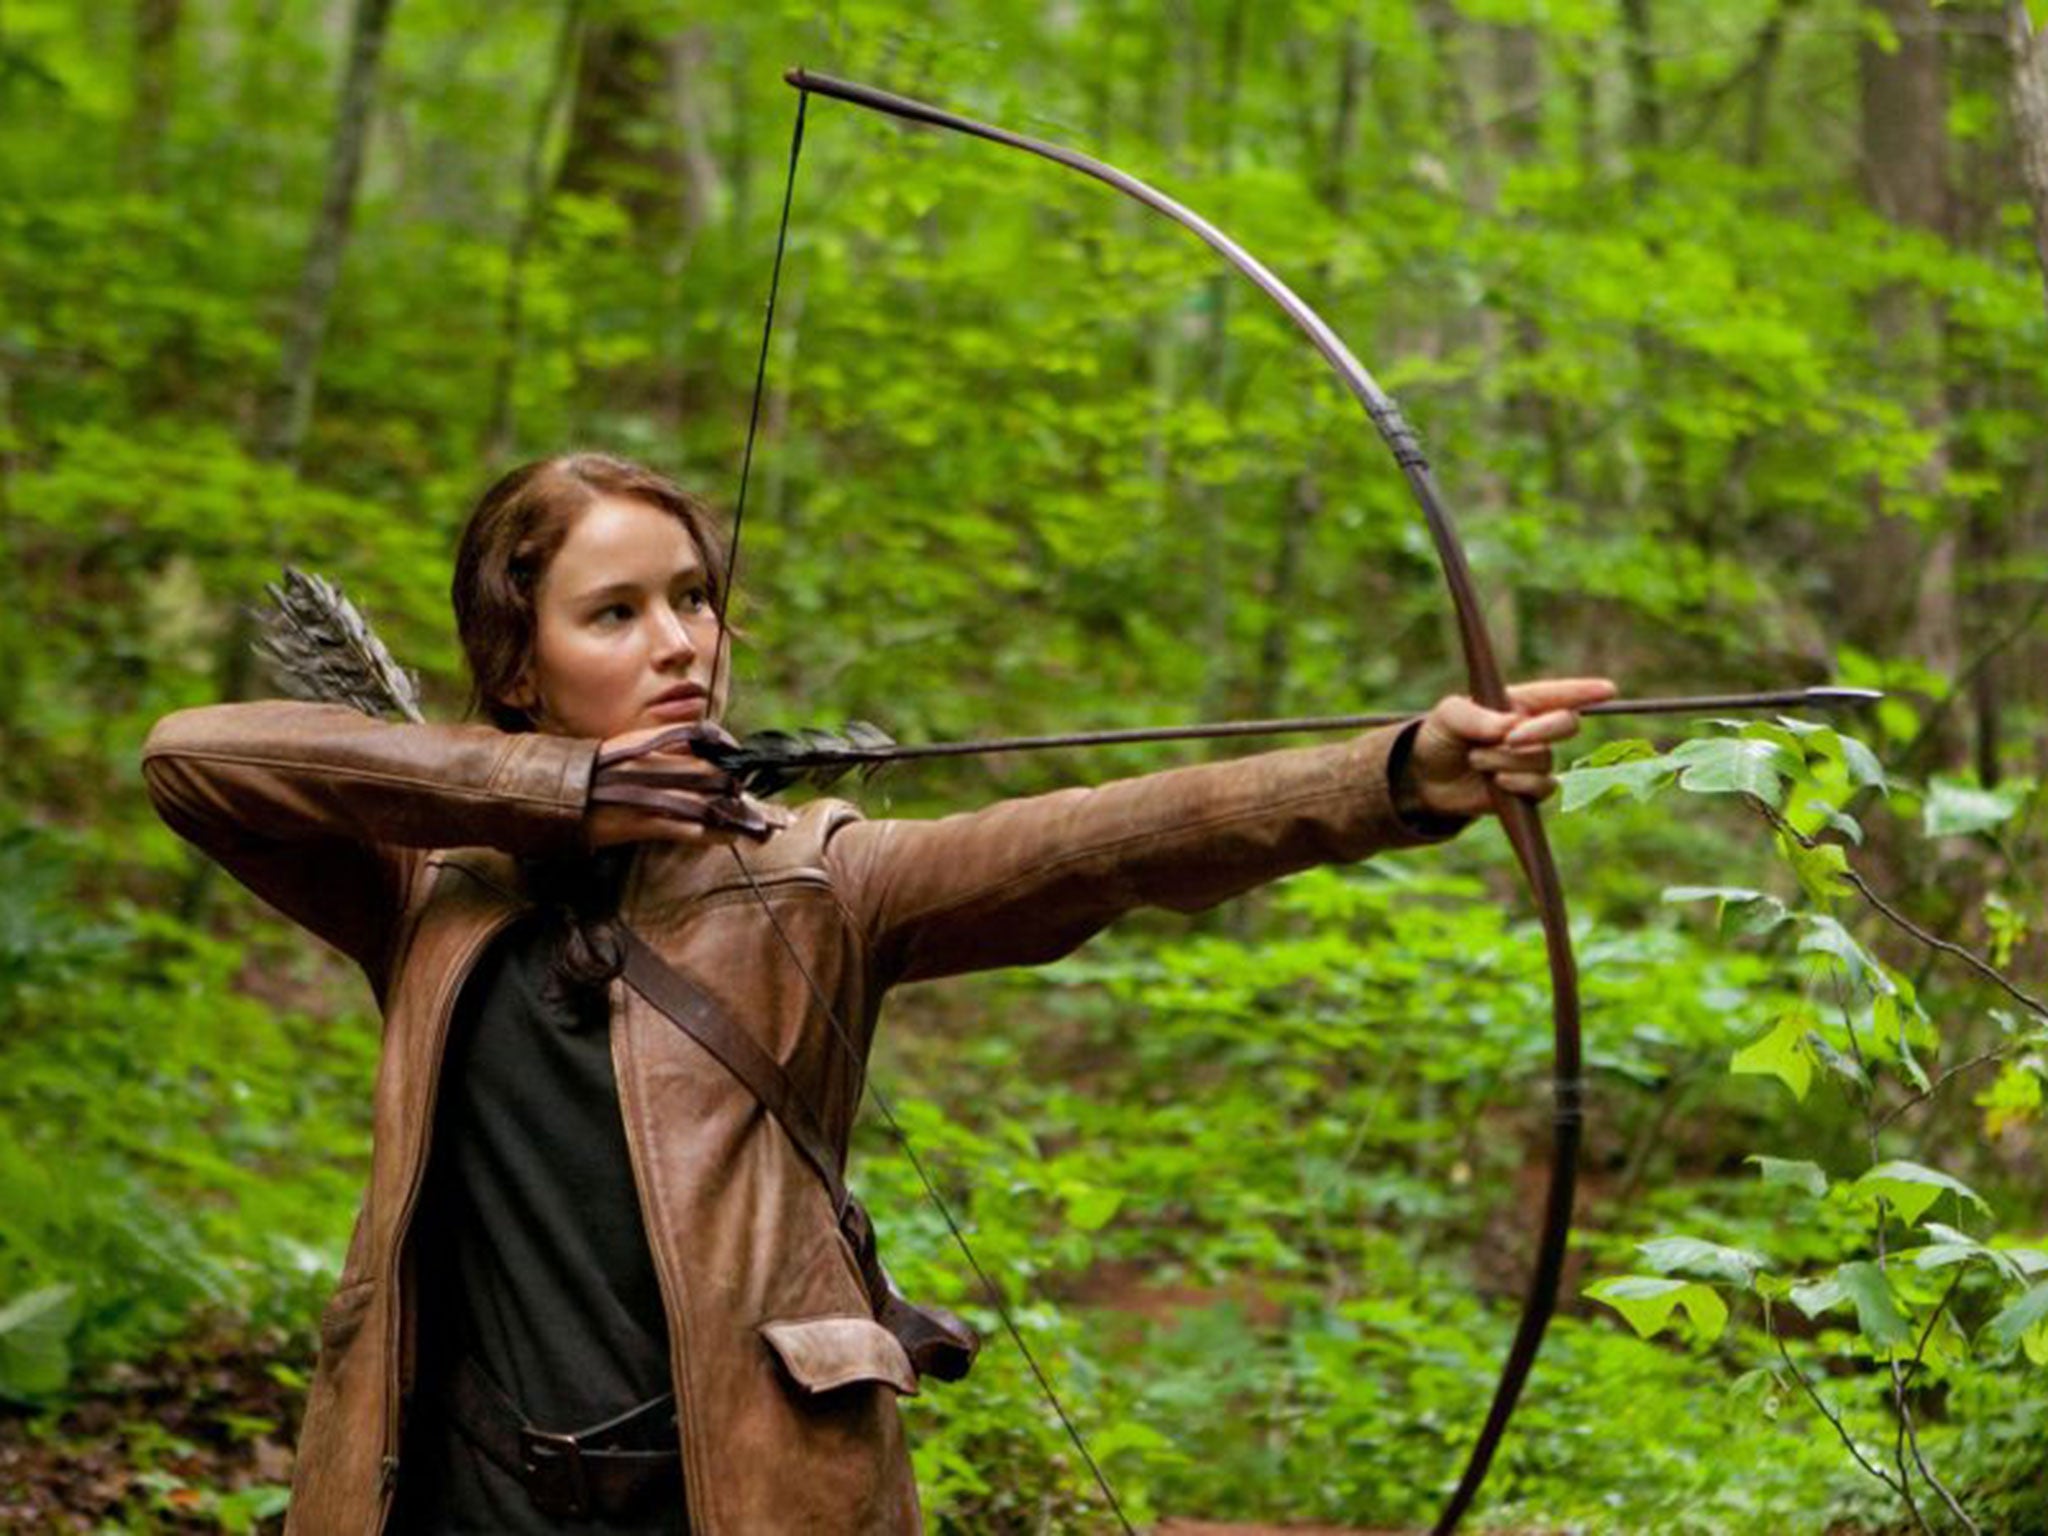 The Hunger Games (2012) was initially heading for a 15 rating, but after guidance from the BBFC was cut to a 12A so its core audience could see it